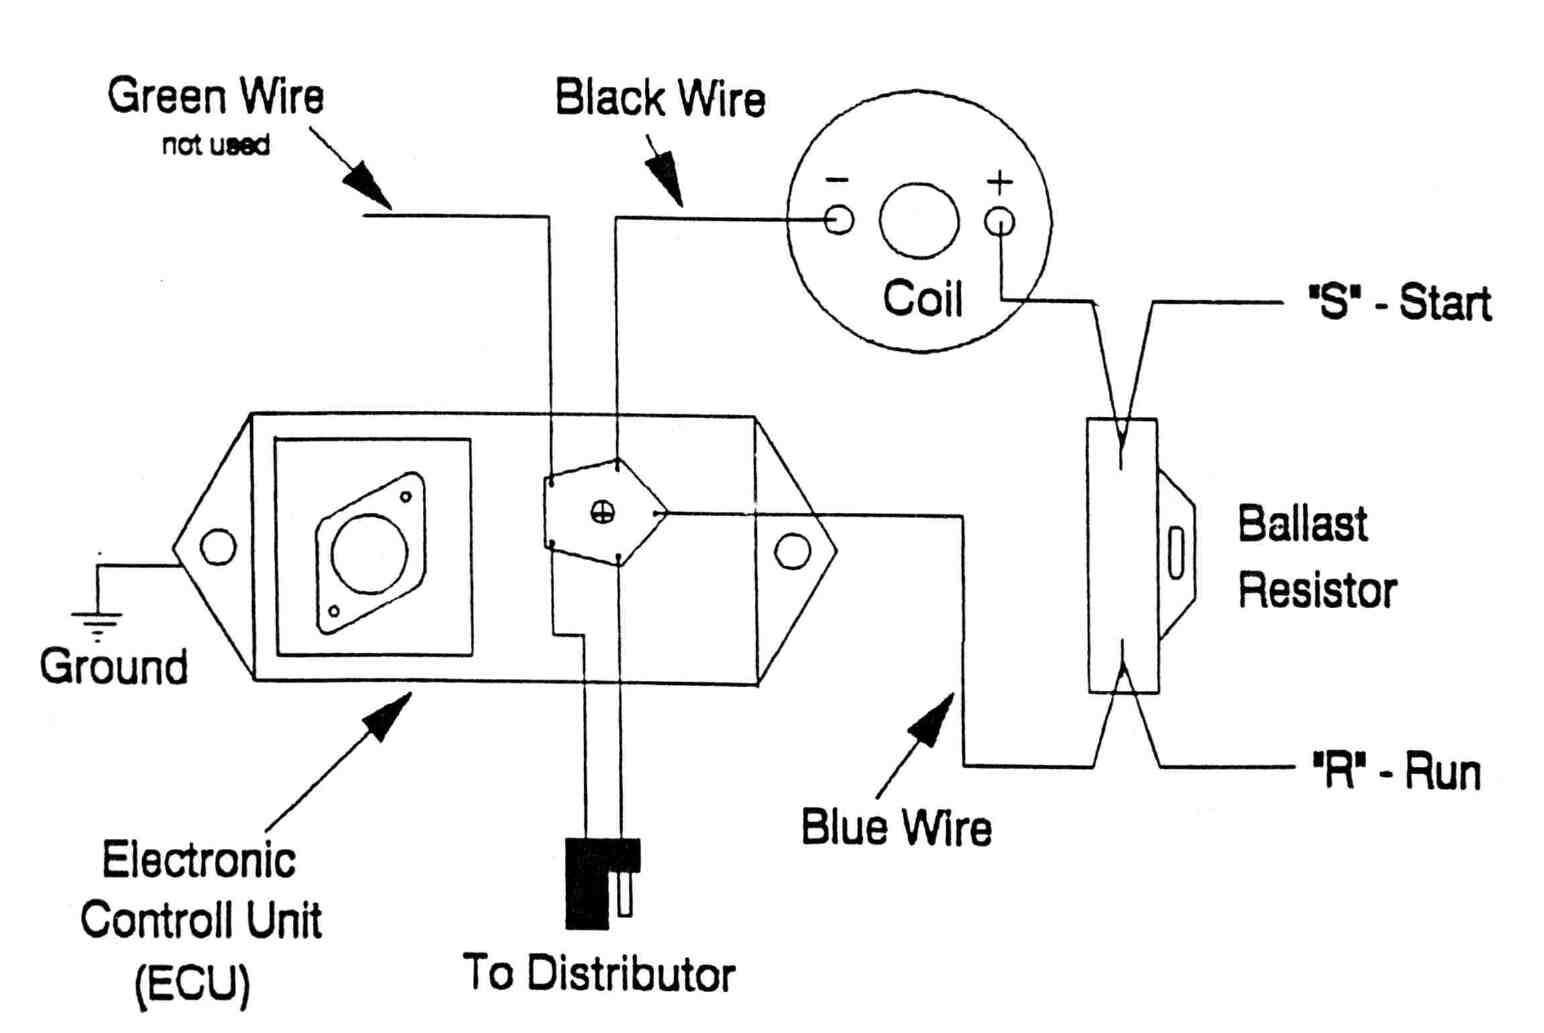 Dodge Electronic Ignition Wiring Diagram | Wiring Library - Dodge Electronic Ignition Wiring Diagram